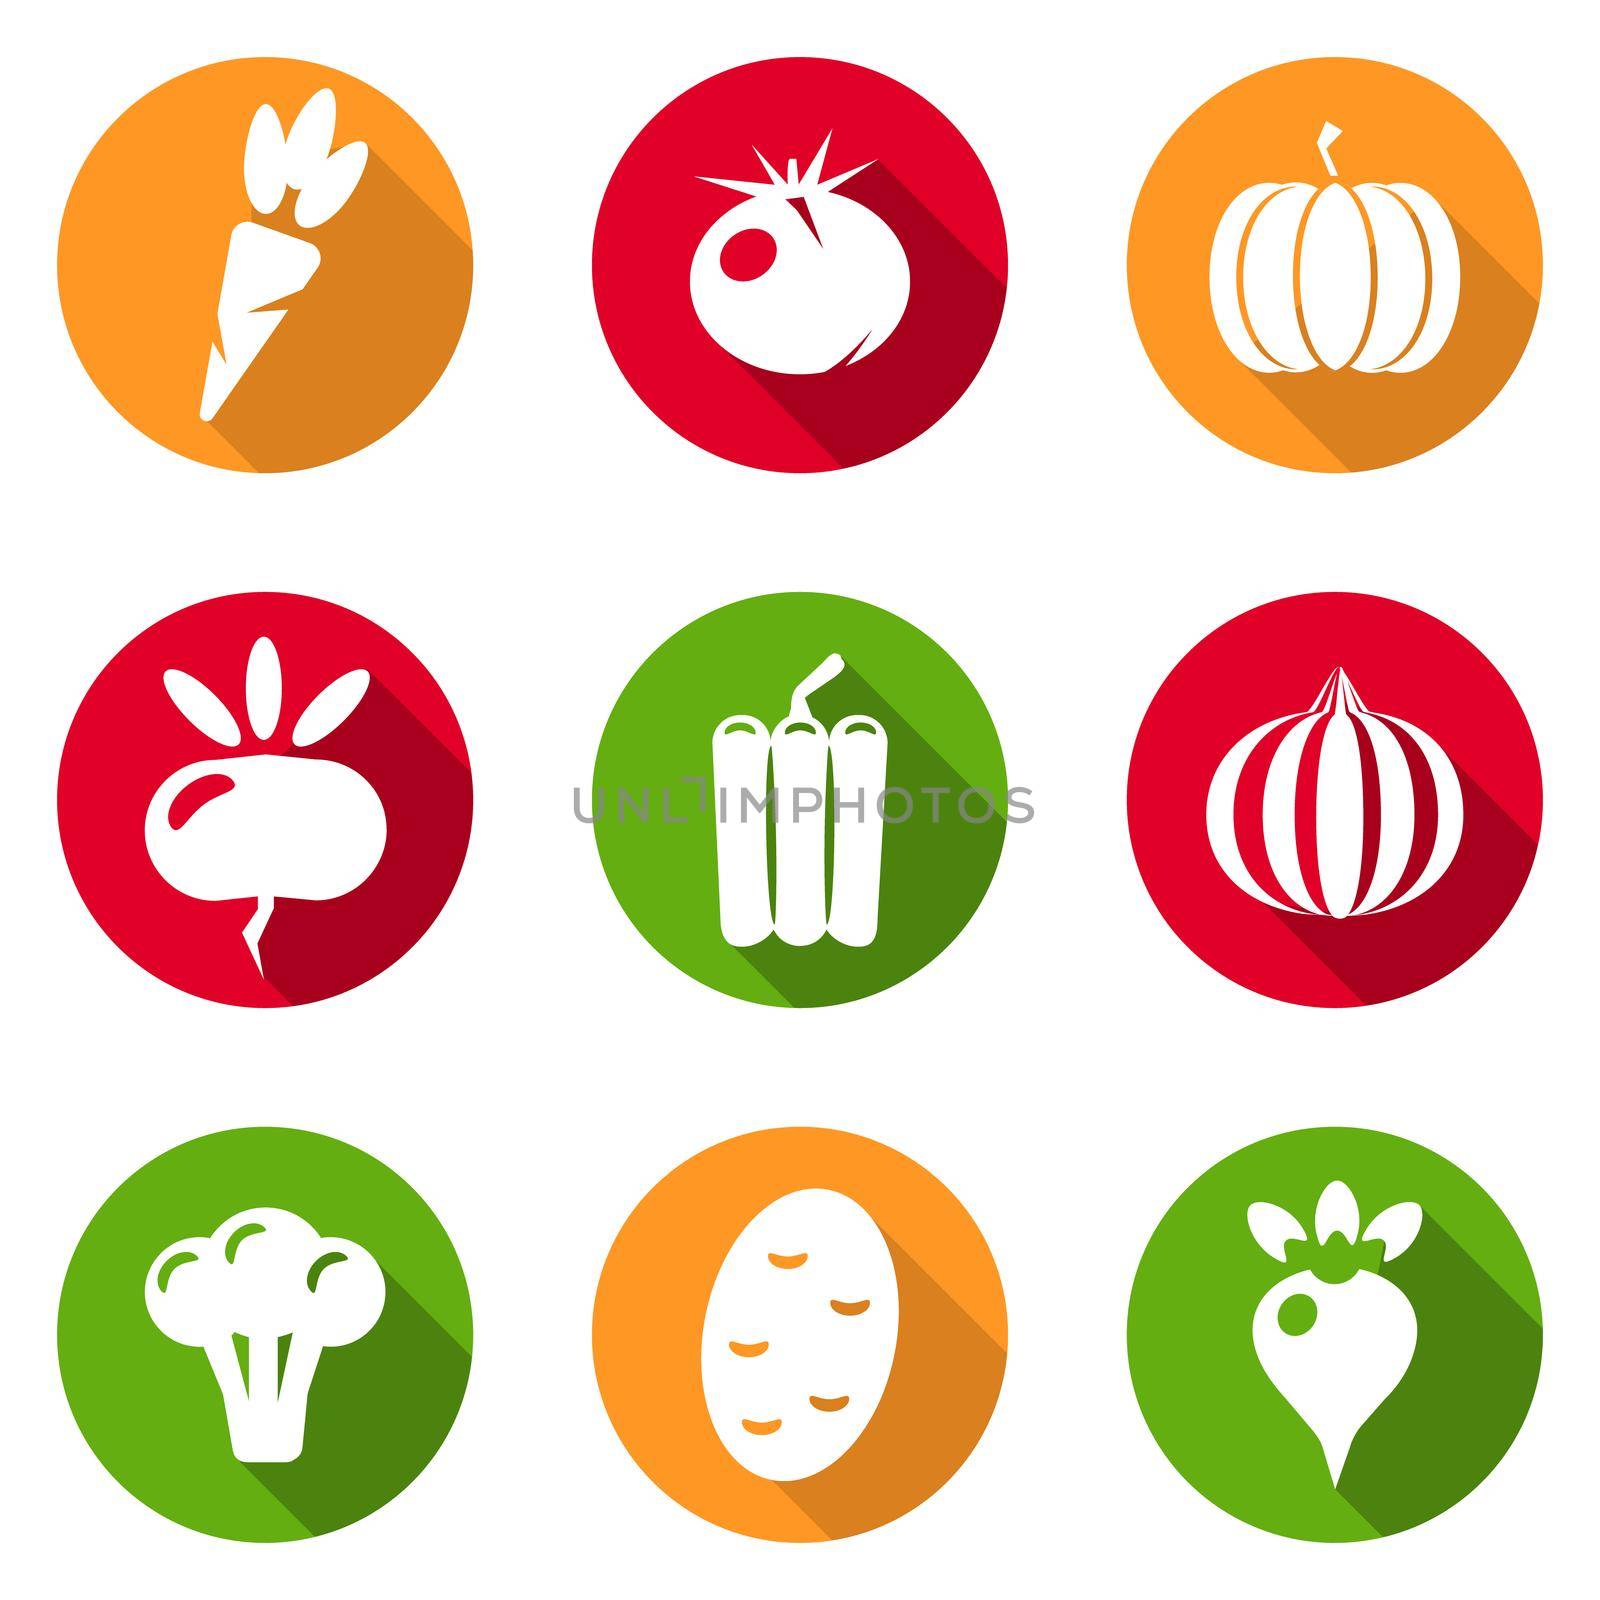 Vegetables icons flat set by Alxyzt